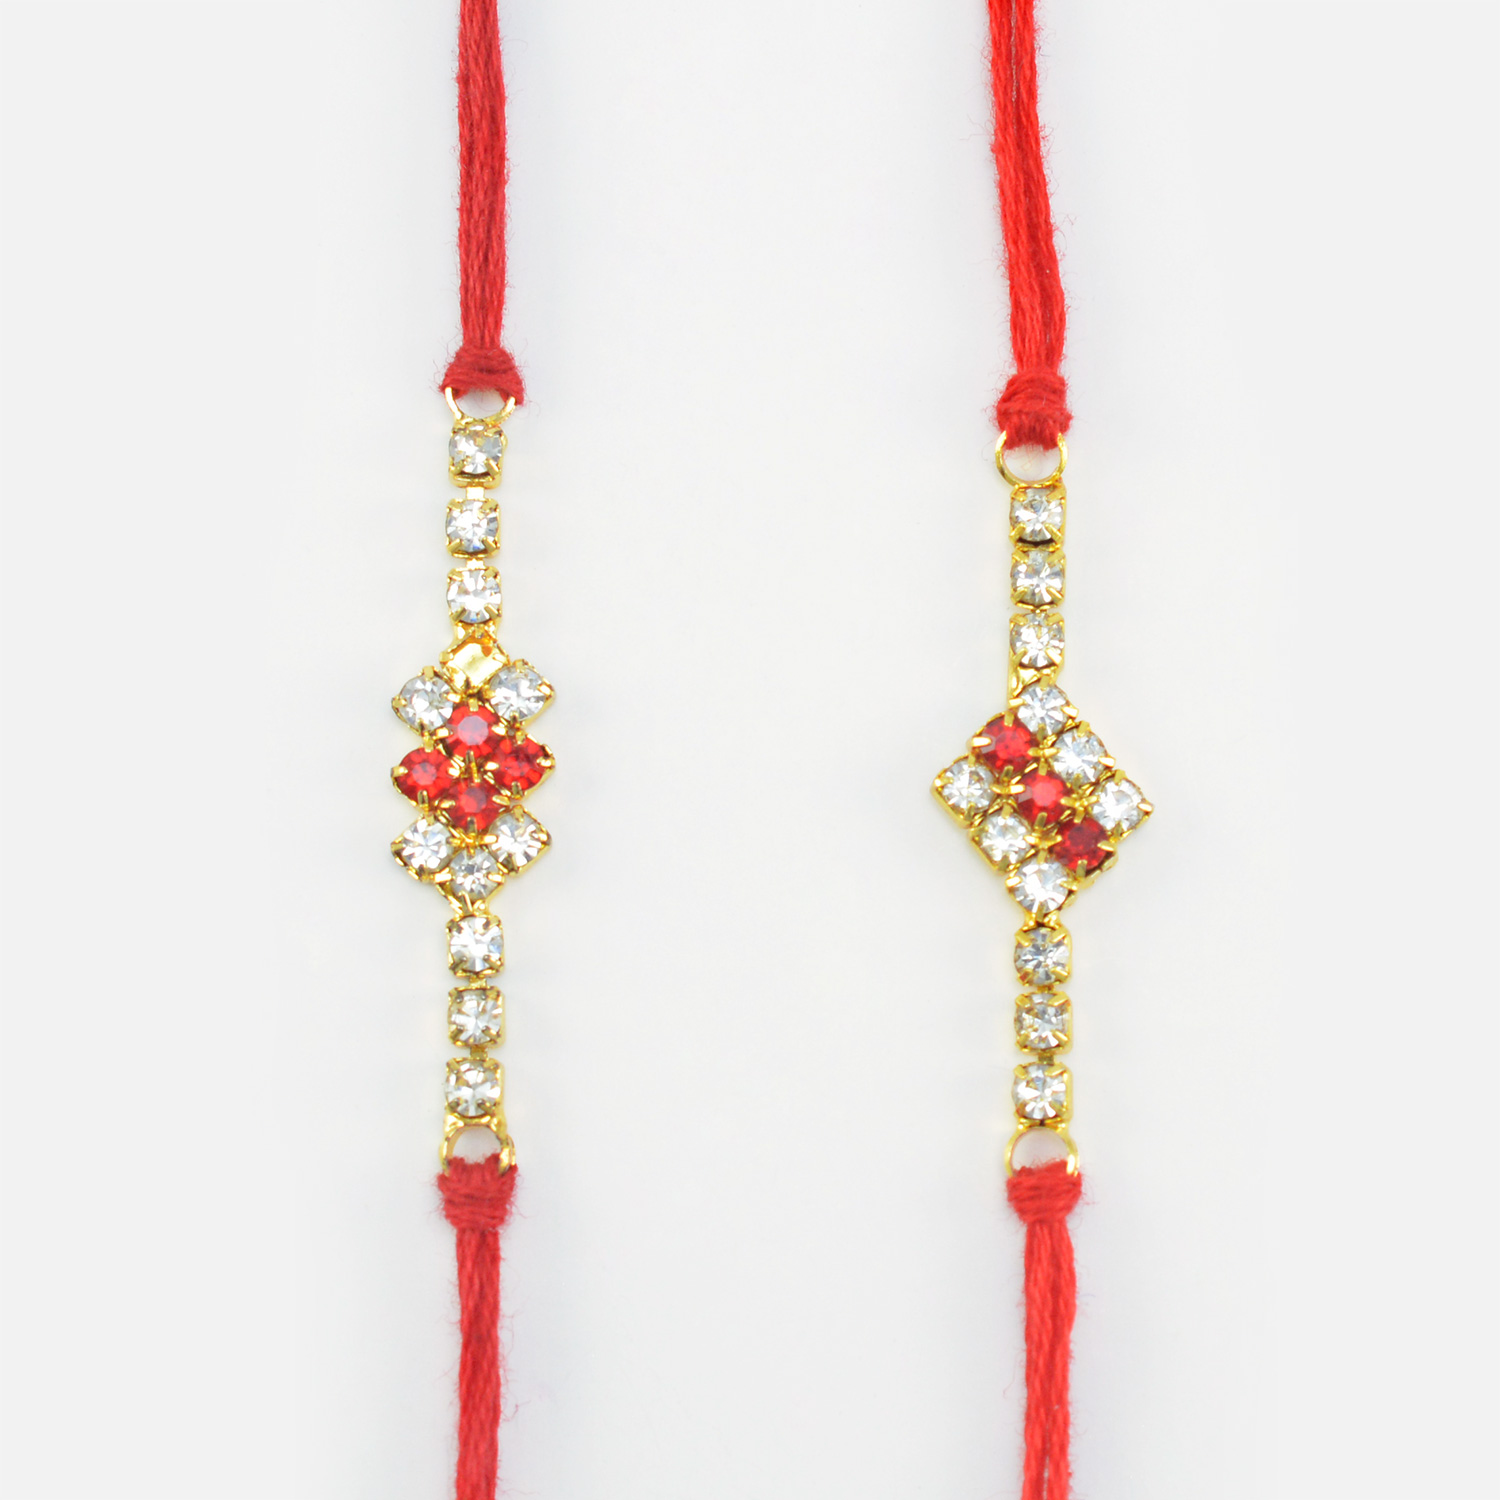 Zigzag Pattern and Rectangle Shape New and Unique Rakhis Set of 2 for Brothers